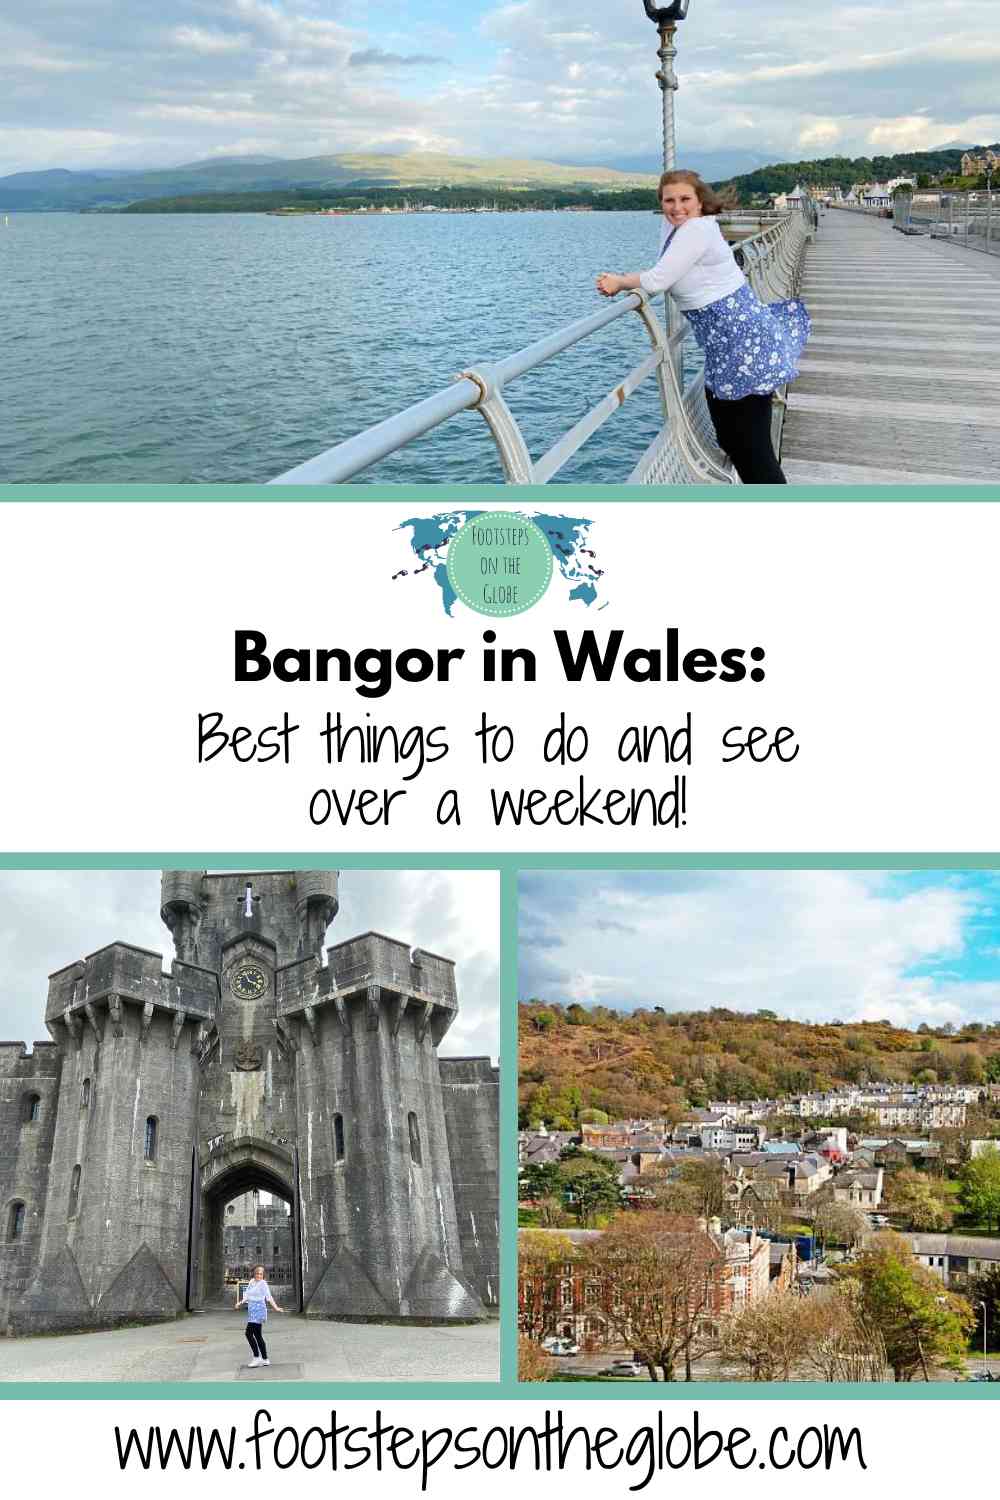 Bangor in Wales best things to do and see over a weekend pinterest image